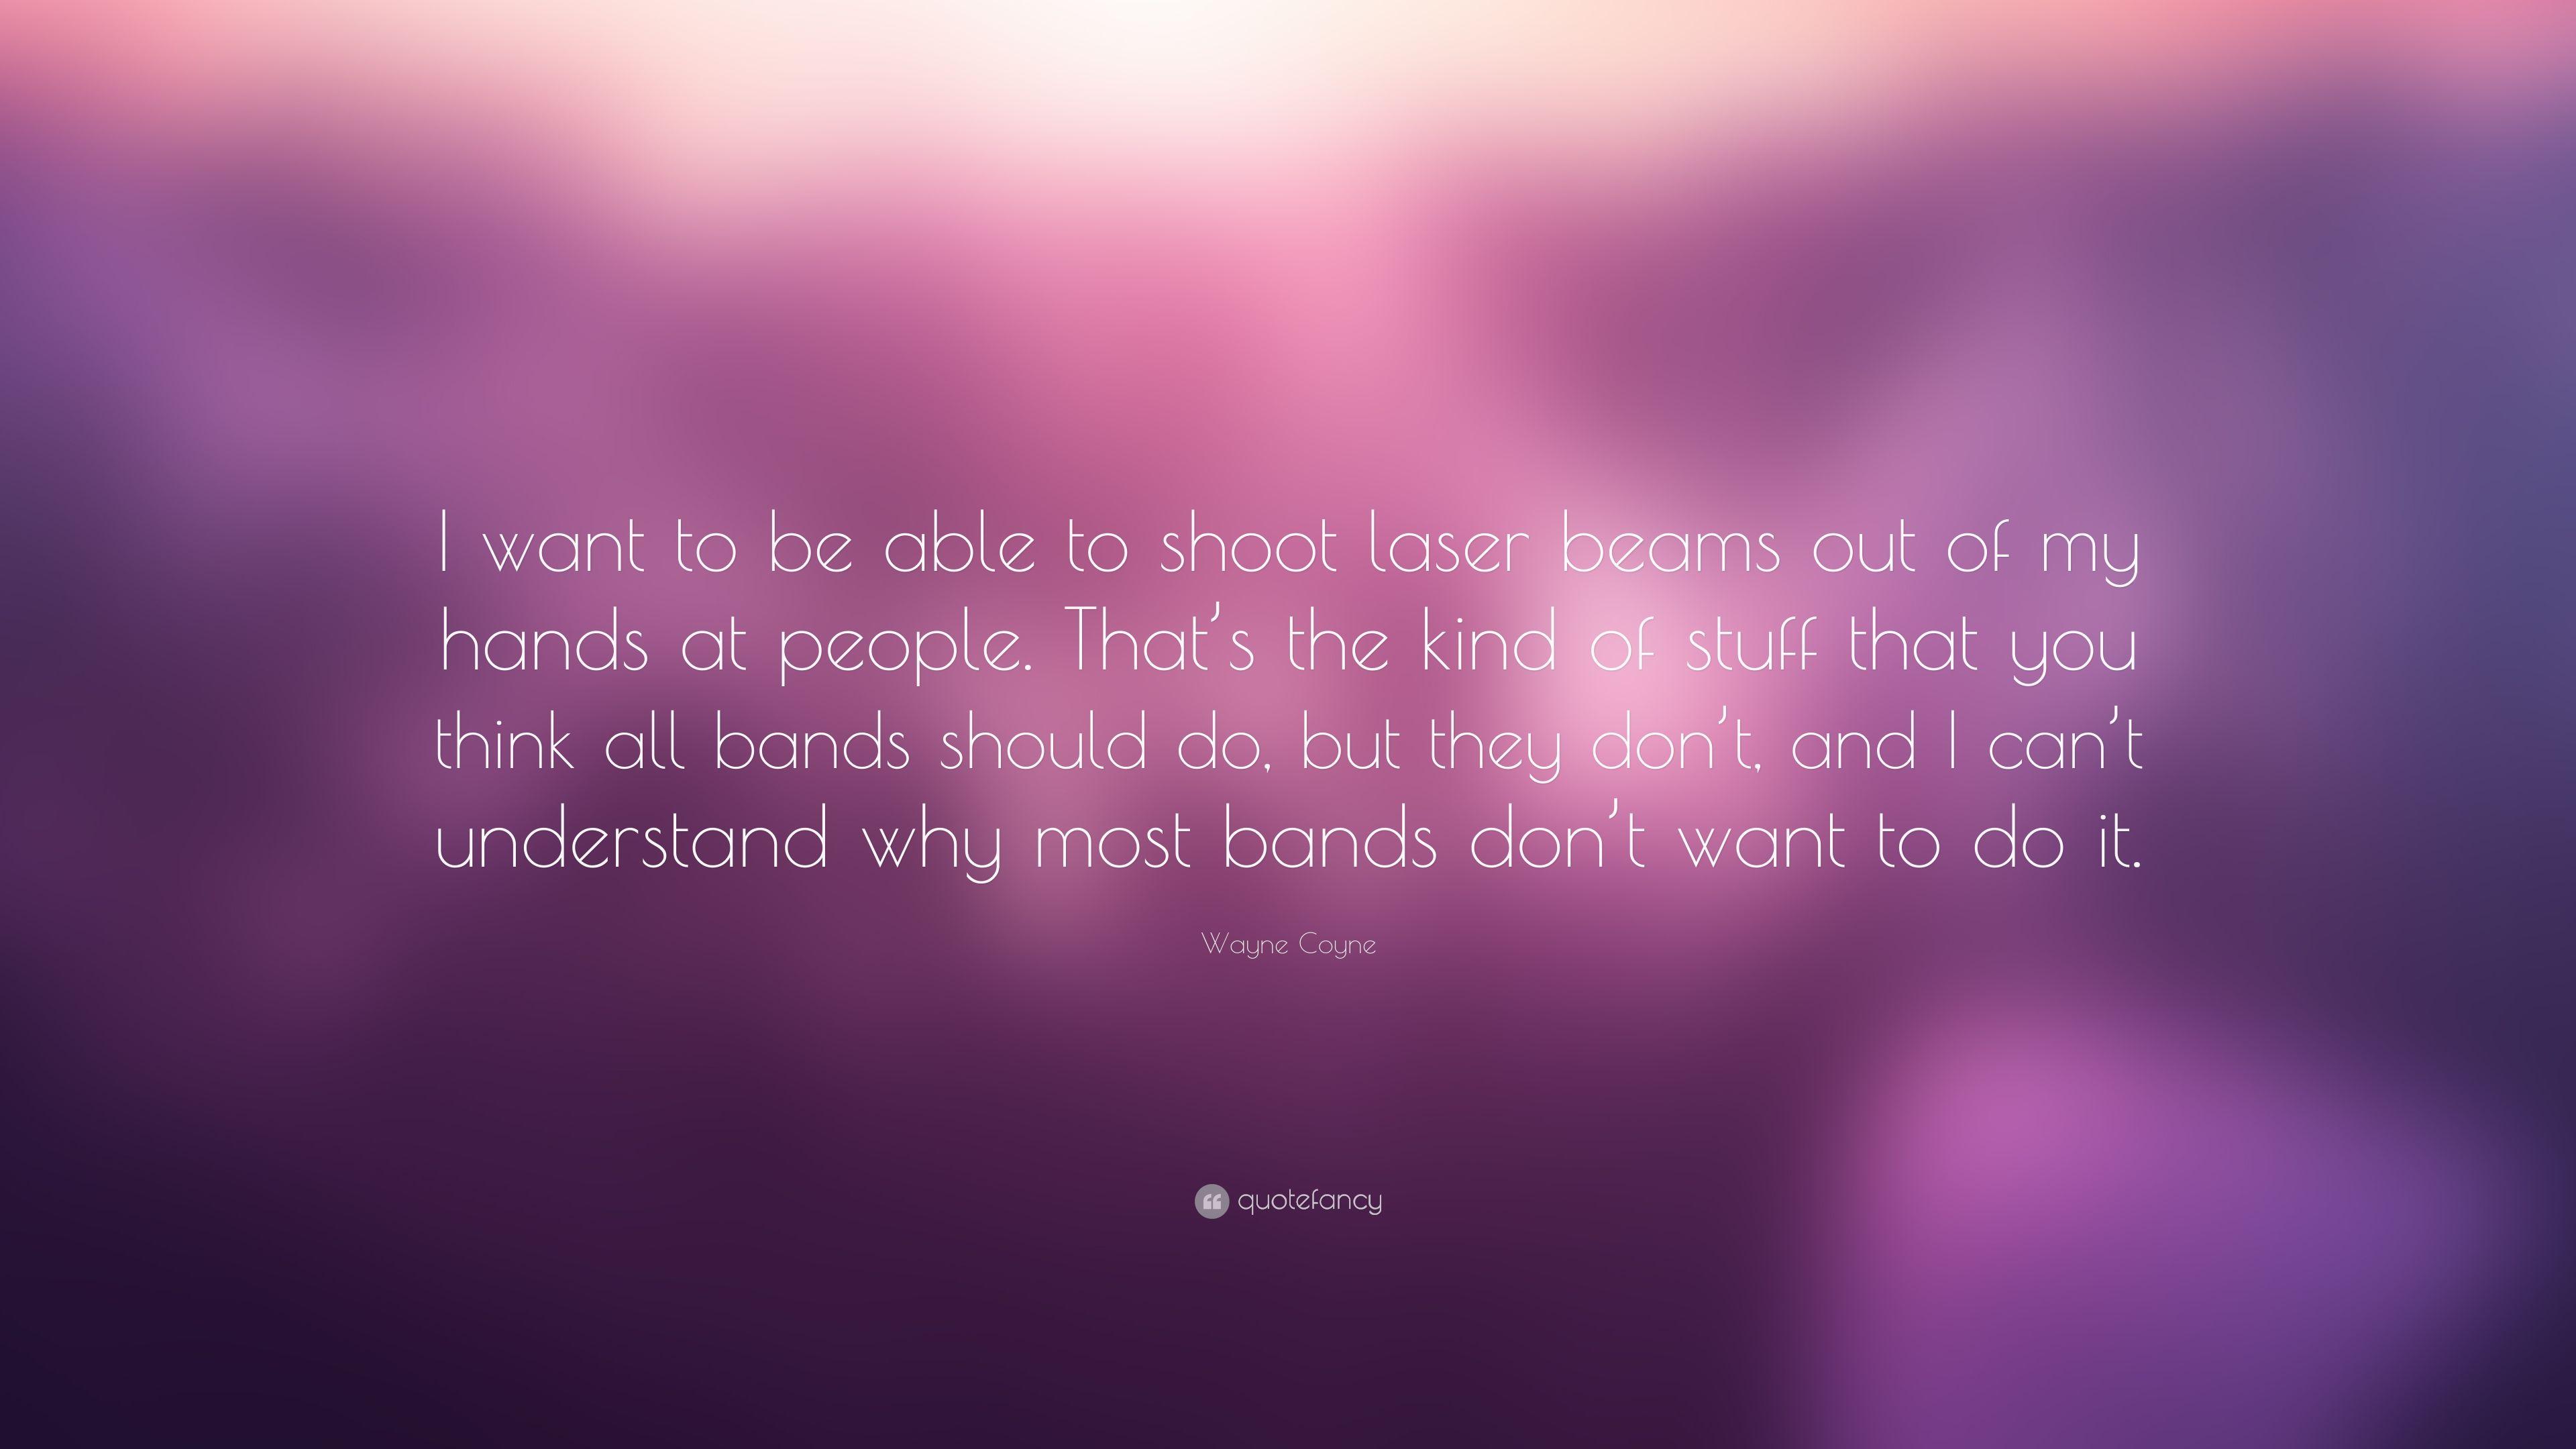 Wayne Coyne Quote: “I want to be able to shoot laser beams